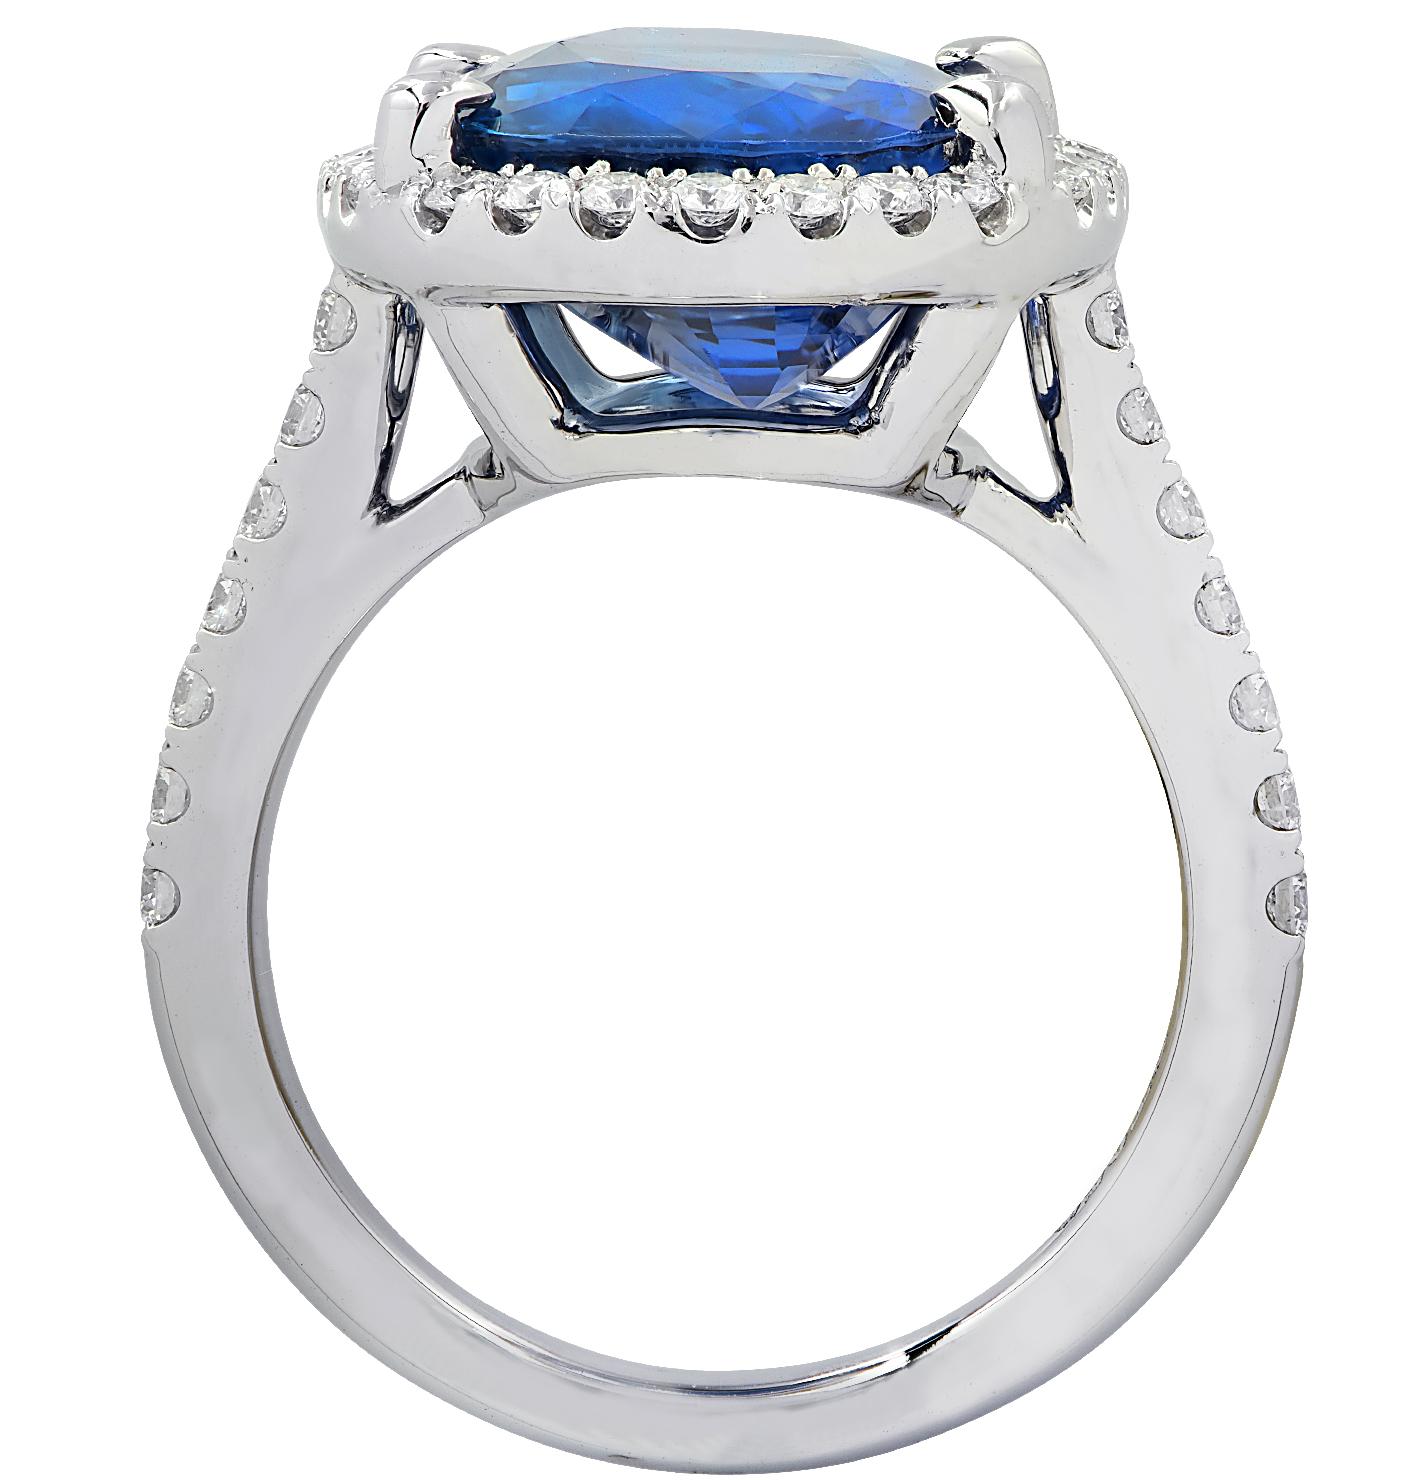 Exceptional Vivid Diamonds Sapphire and Diamond Halo Ring crafted in platinum, showcasing a spectacular blue oval sapphire weighing 9.68 carats adorned with 40 round brilliant cut diamonds weighing .64 carats total. The sapphire is surrounded by a